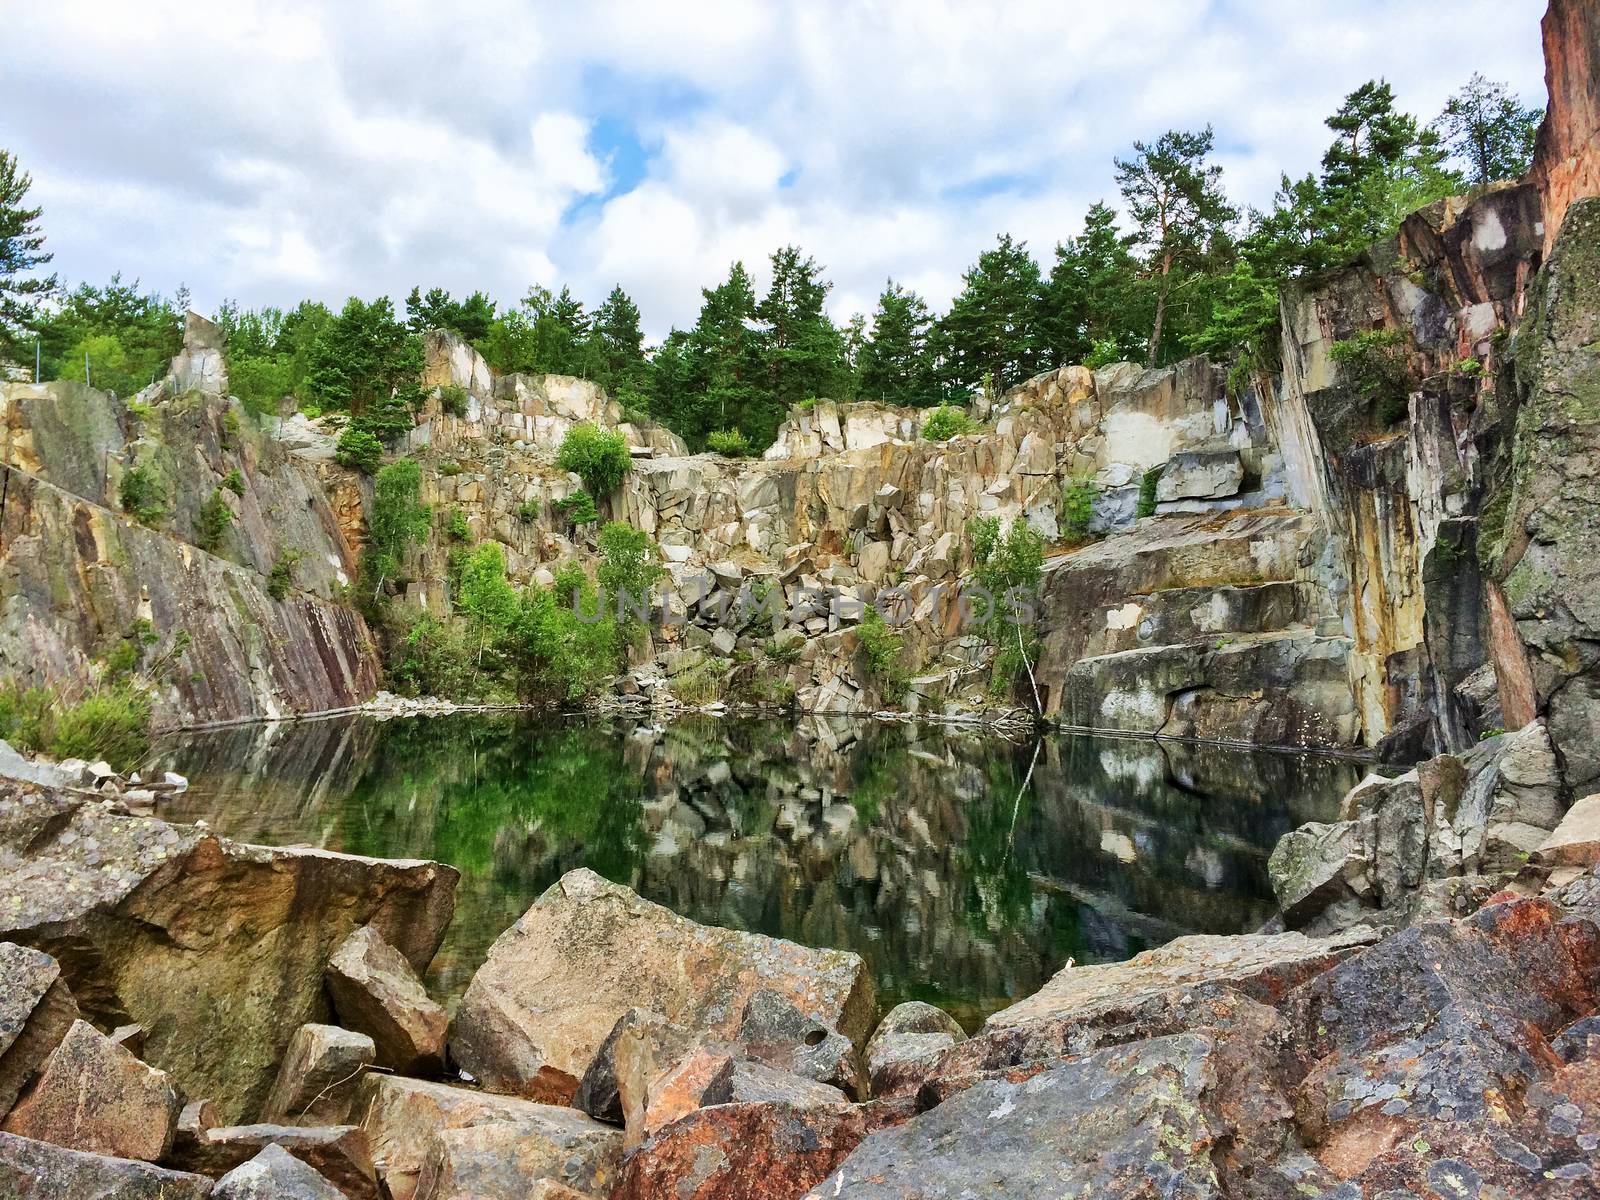 Beautiful lake in Sweden, surrounded by rocks and trees. Ancient stone quarry, abandoned many years ago.